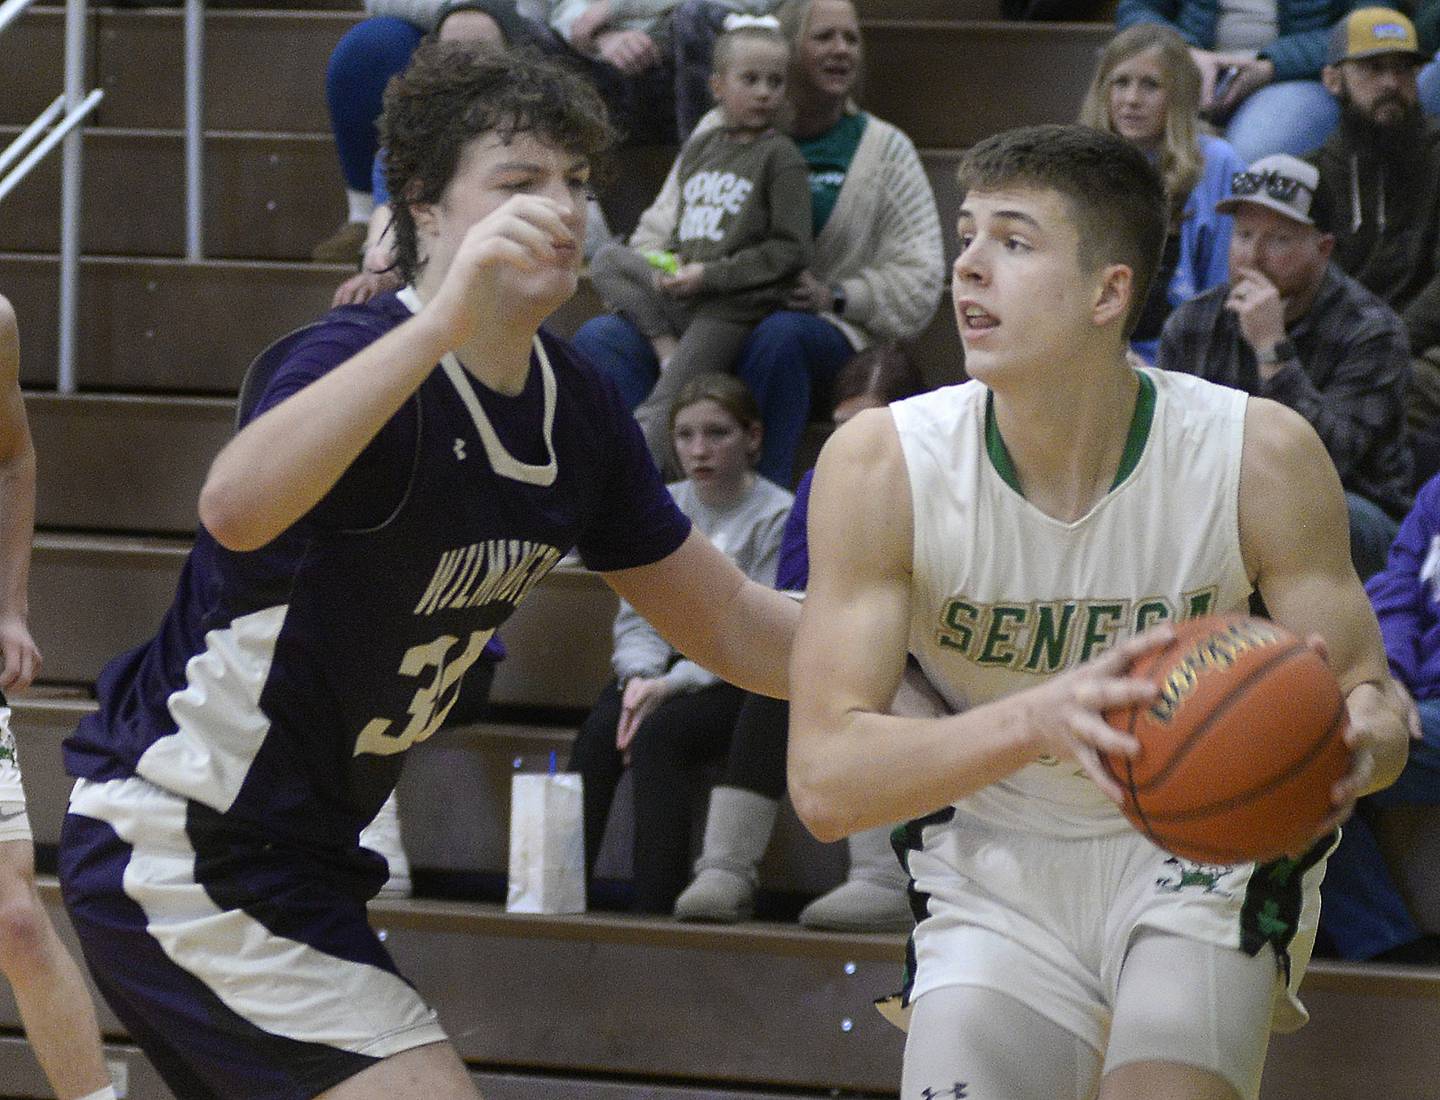 Seneca’s Lane Provance looks for a pass outlet as Wilmington’s Joey Cortese guards the lane  in the 4th period on Saturday, Feb. 4, 2023 at Seneca.